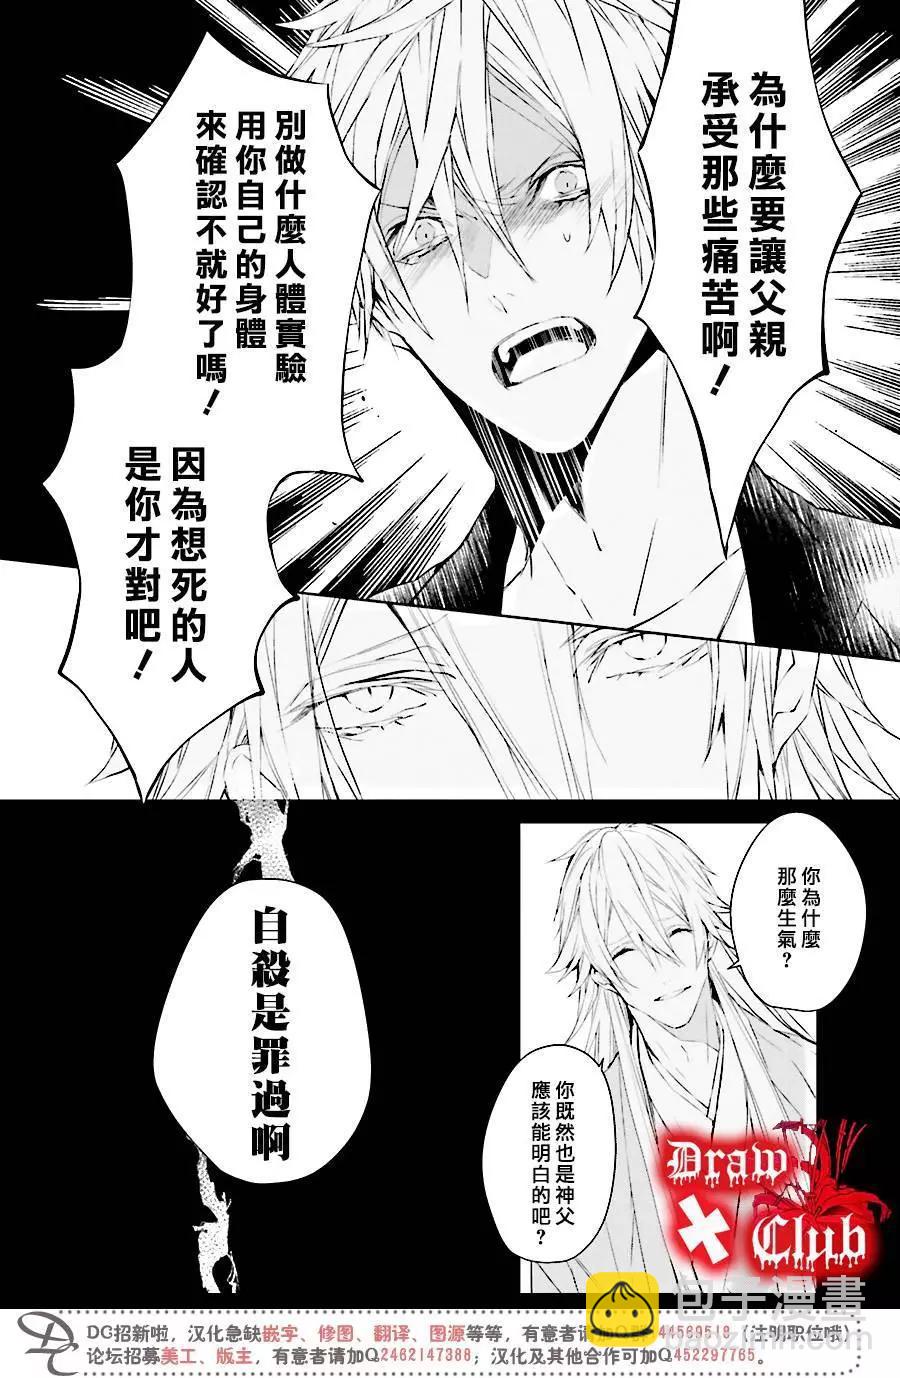 Bloody Mary - 第34回 - 5